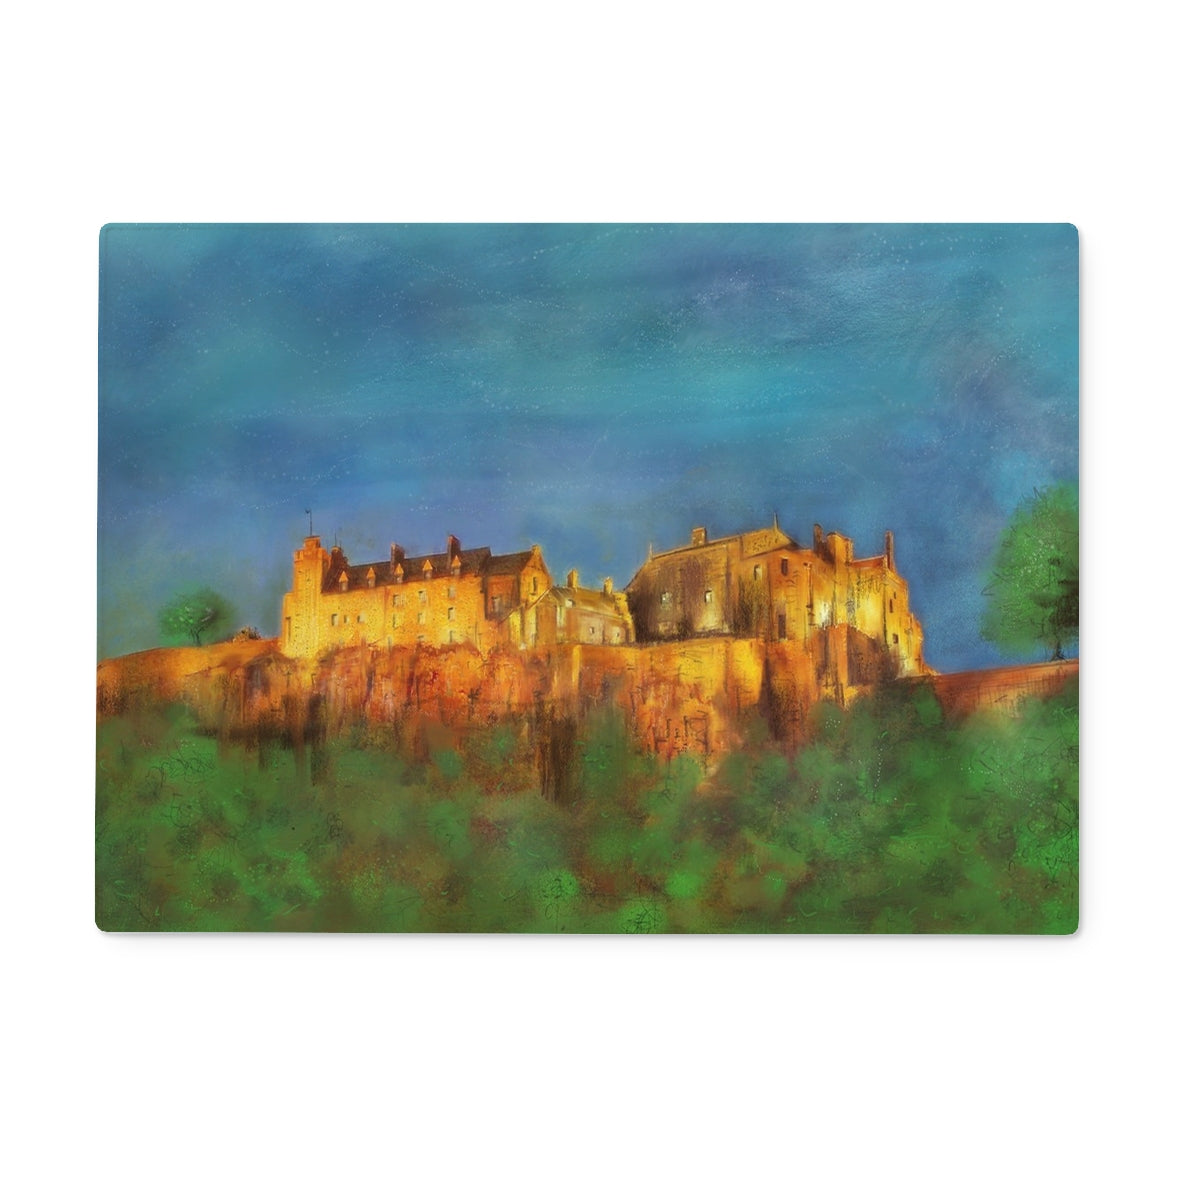 Stirling Castle Art Gifts Glass Chopping Board-Glass Chopping Boards-Historic & Iconic Scotland Art Gallery-15"x11" Rectangular-Paintings, Prints, Homeware, Art Gifts From Scotland By Scottish Artist Kevin Hunter